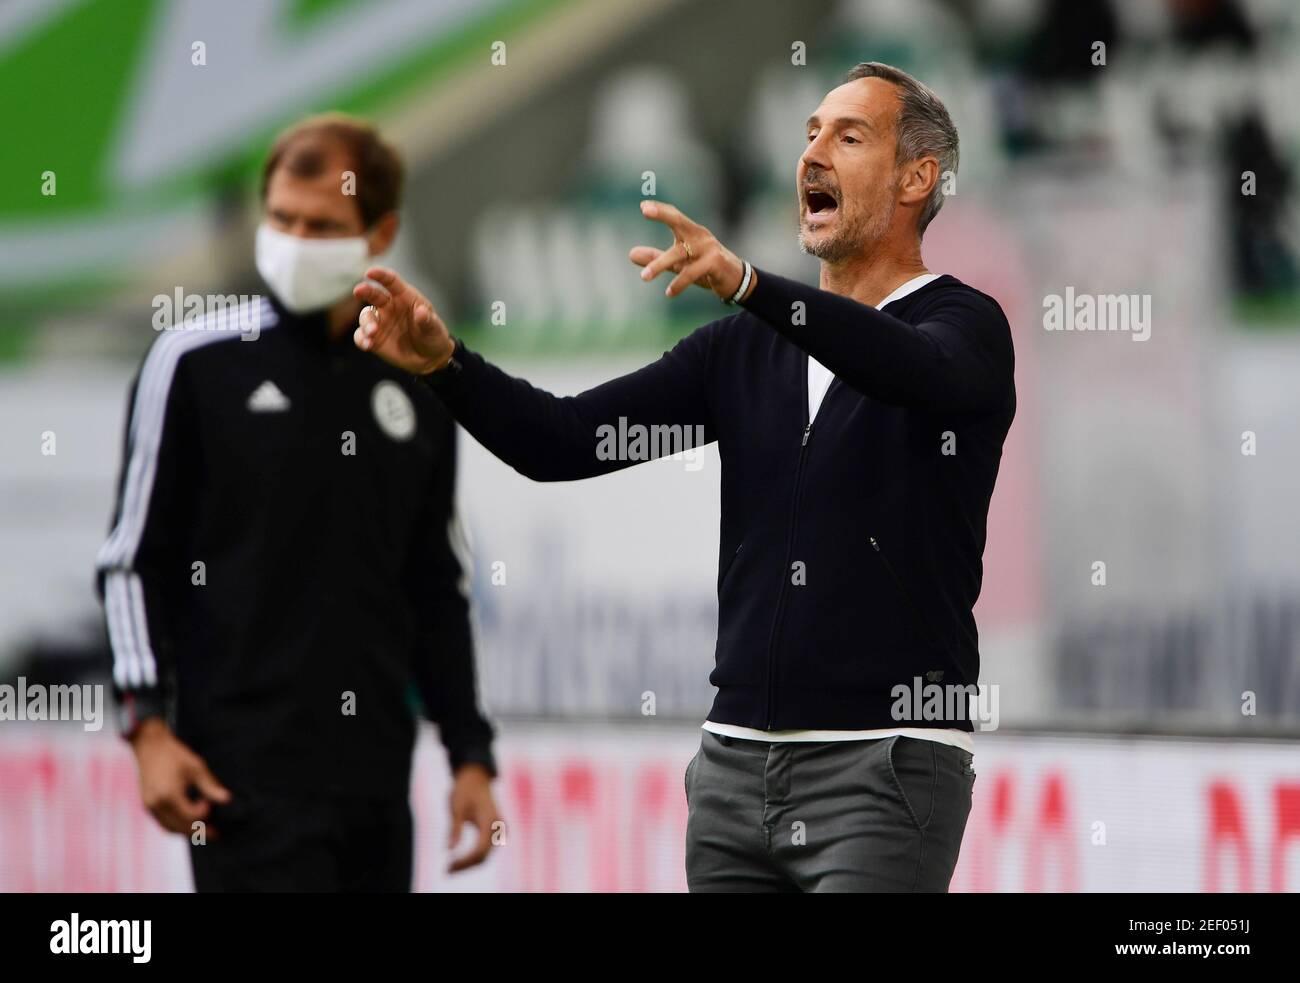 Soccer Football - Bundesliga - VfL Wolfsburg v Eintracht Frankfurt - Volkswagen Arena, Wolfsburg, Germany - May 30, 2020 Eintracht Frankfurt coach Adi Hutter reacts during the match, as play resumes behind closed doors following the outbreak of the coronavirus disease (COVID-19) Swen Pfortner/Pool via REUTERS  DFL regulations prohibit any use of photographs as image sequences and/or quasi-video Stock Photo